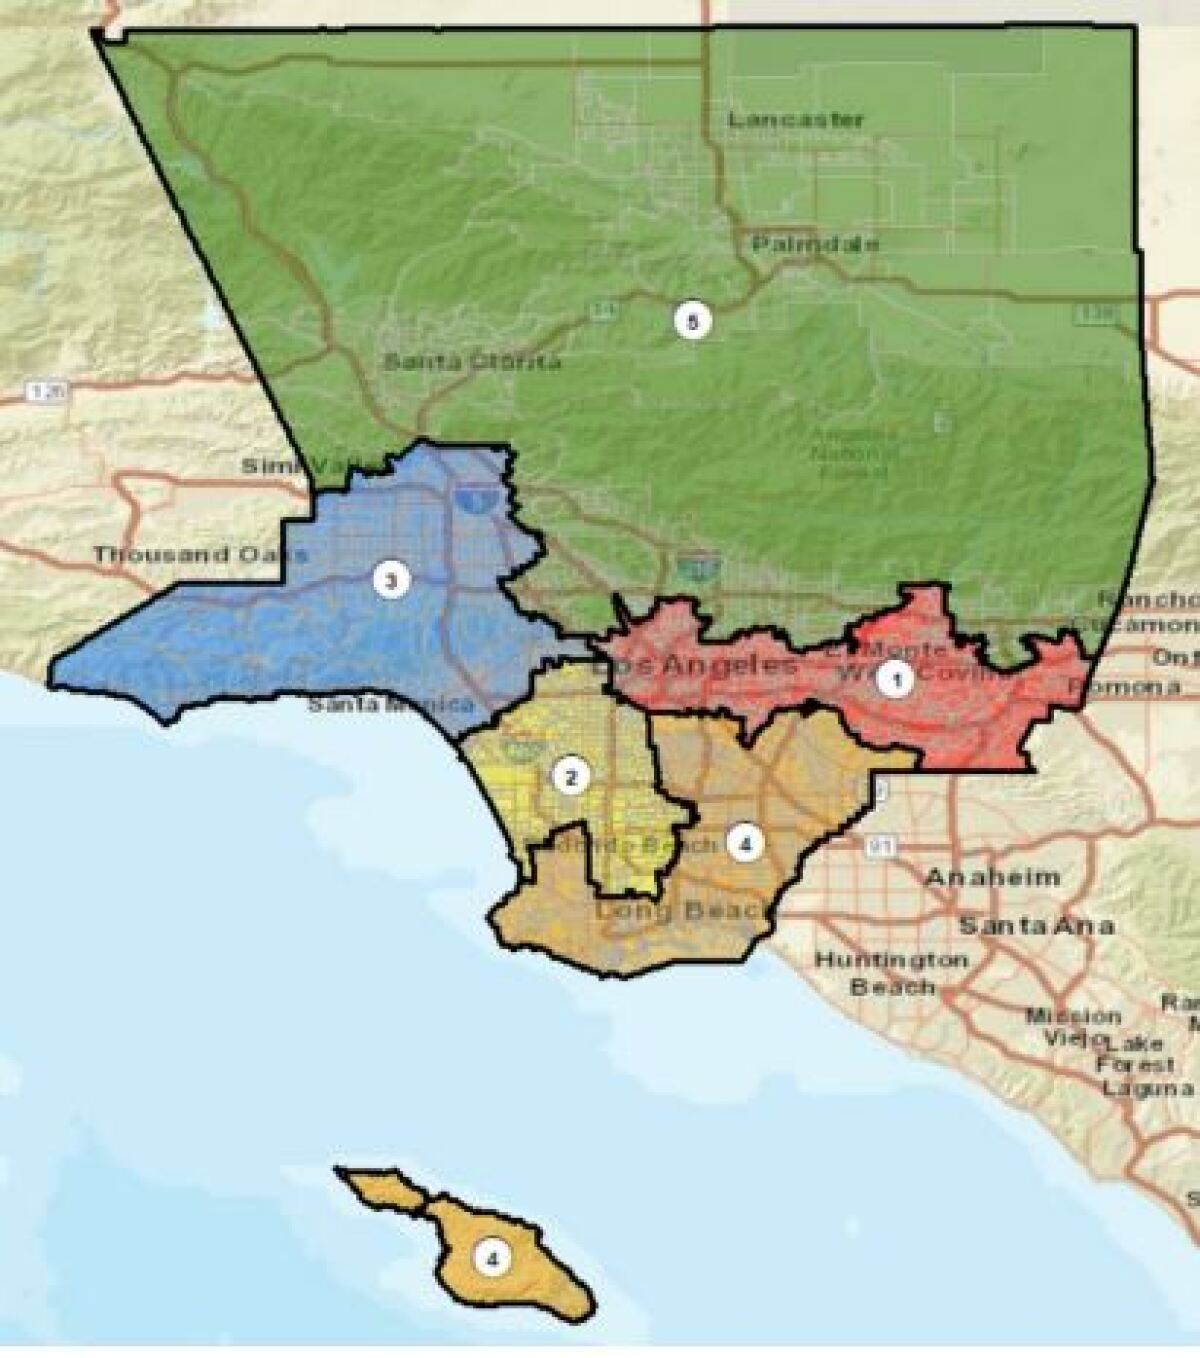 A map of five supervisorial districts in L.A. County